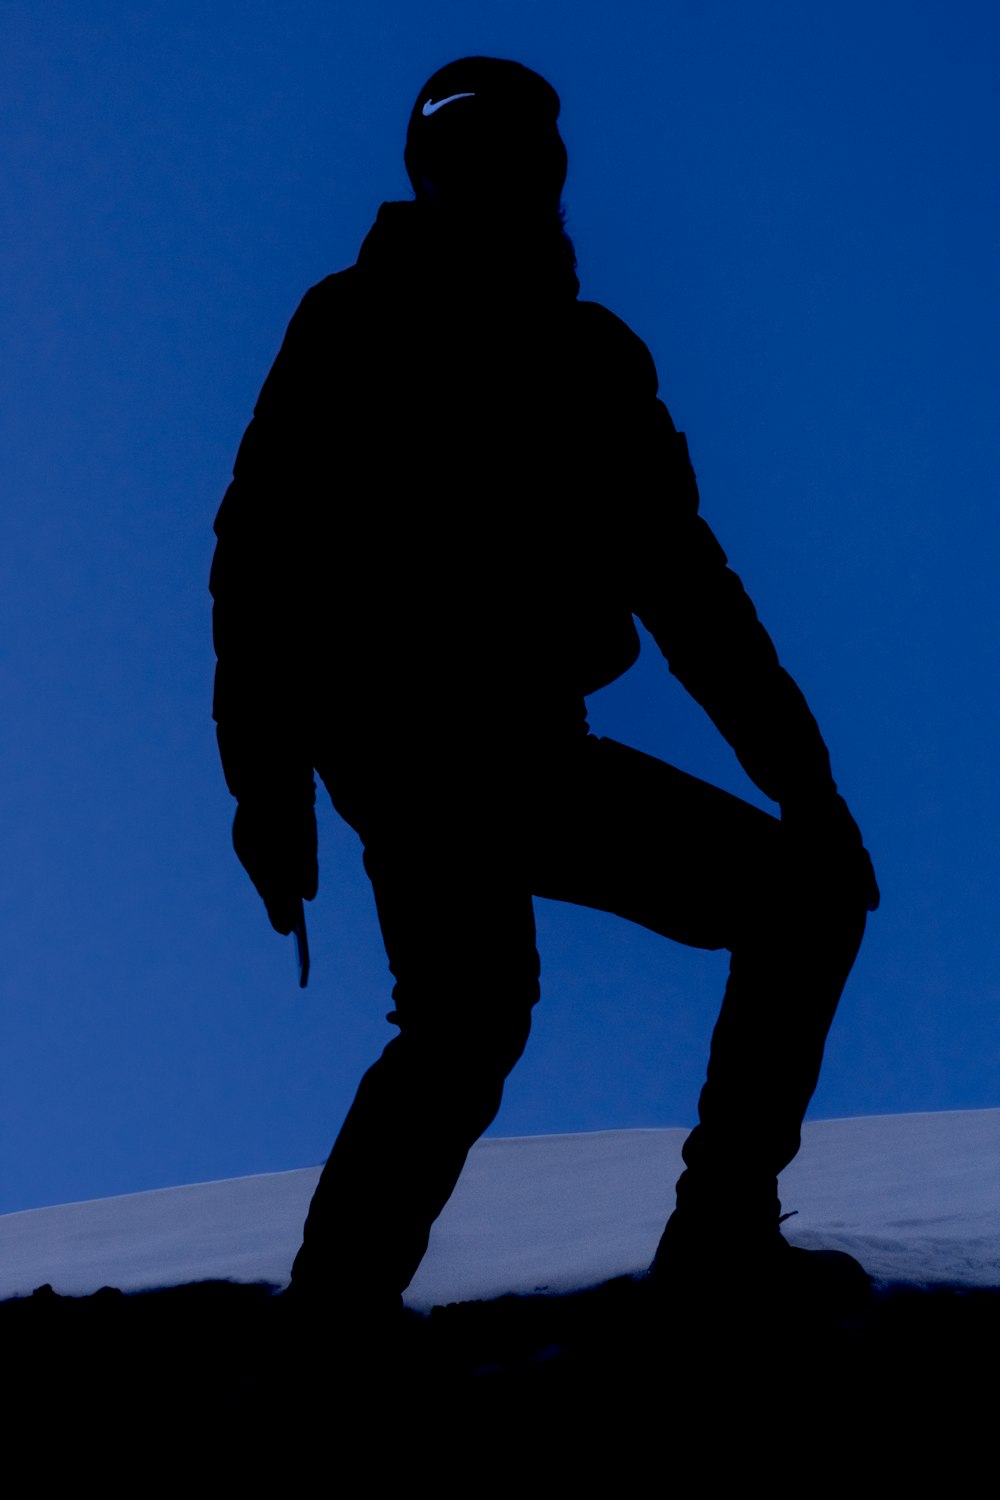 a silhouette of a person standing on a hill